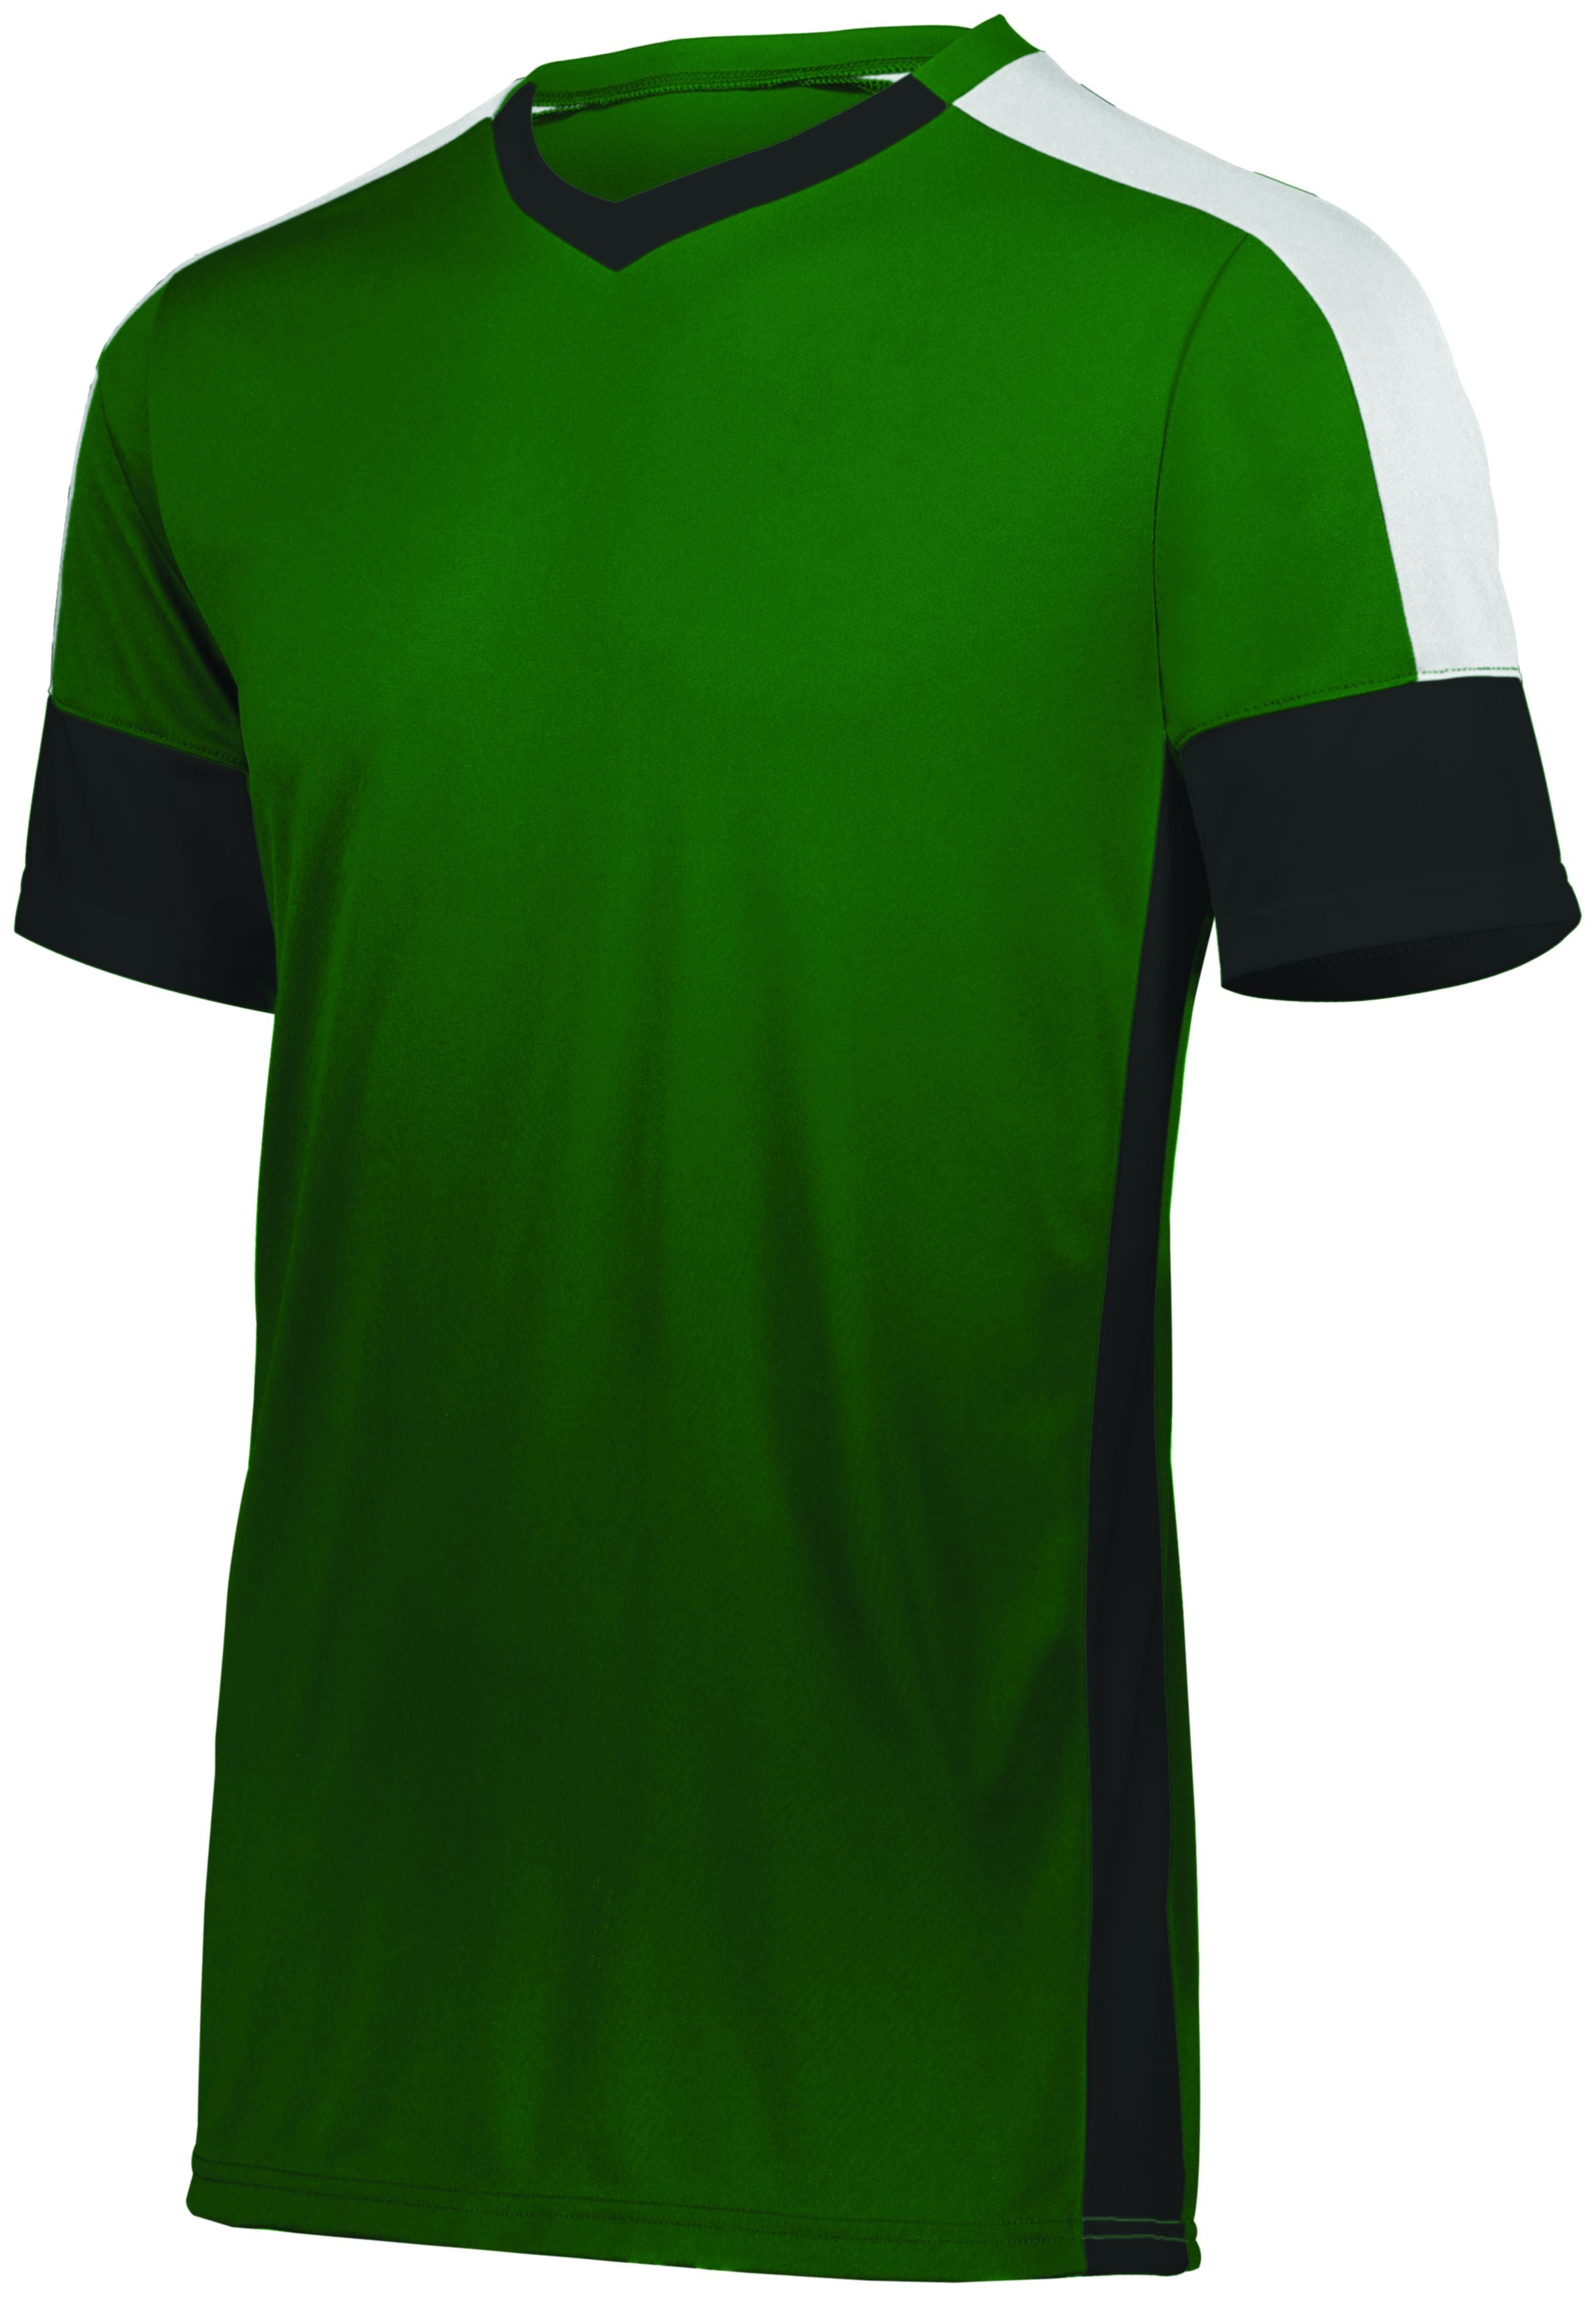 High 5 Youth Wembley Soccer Jersey